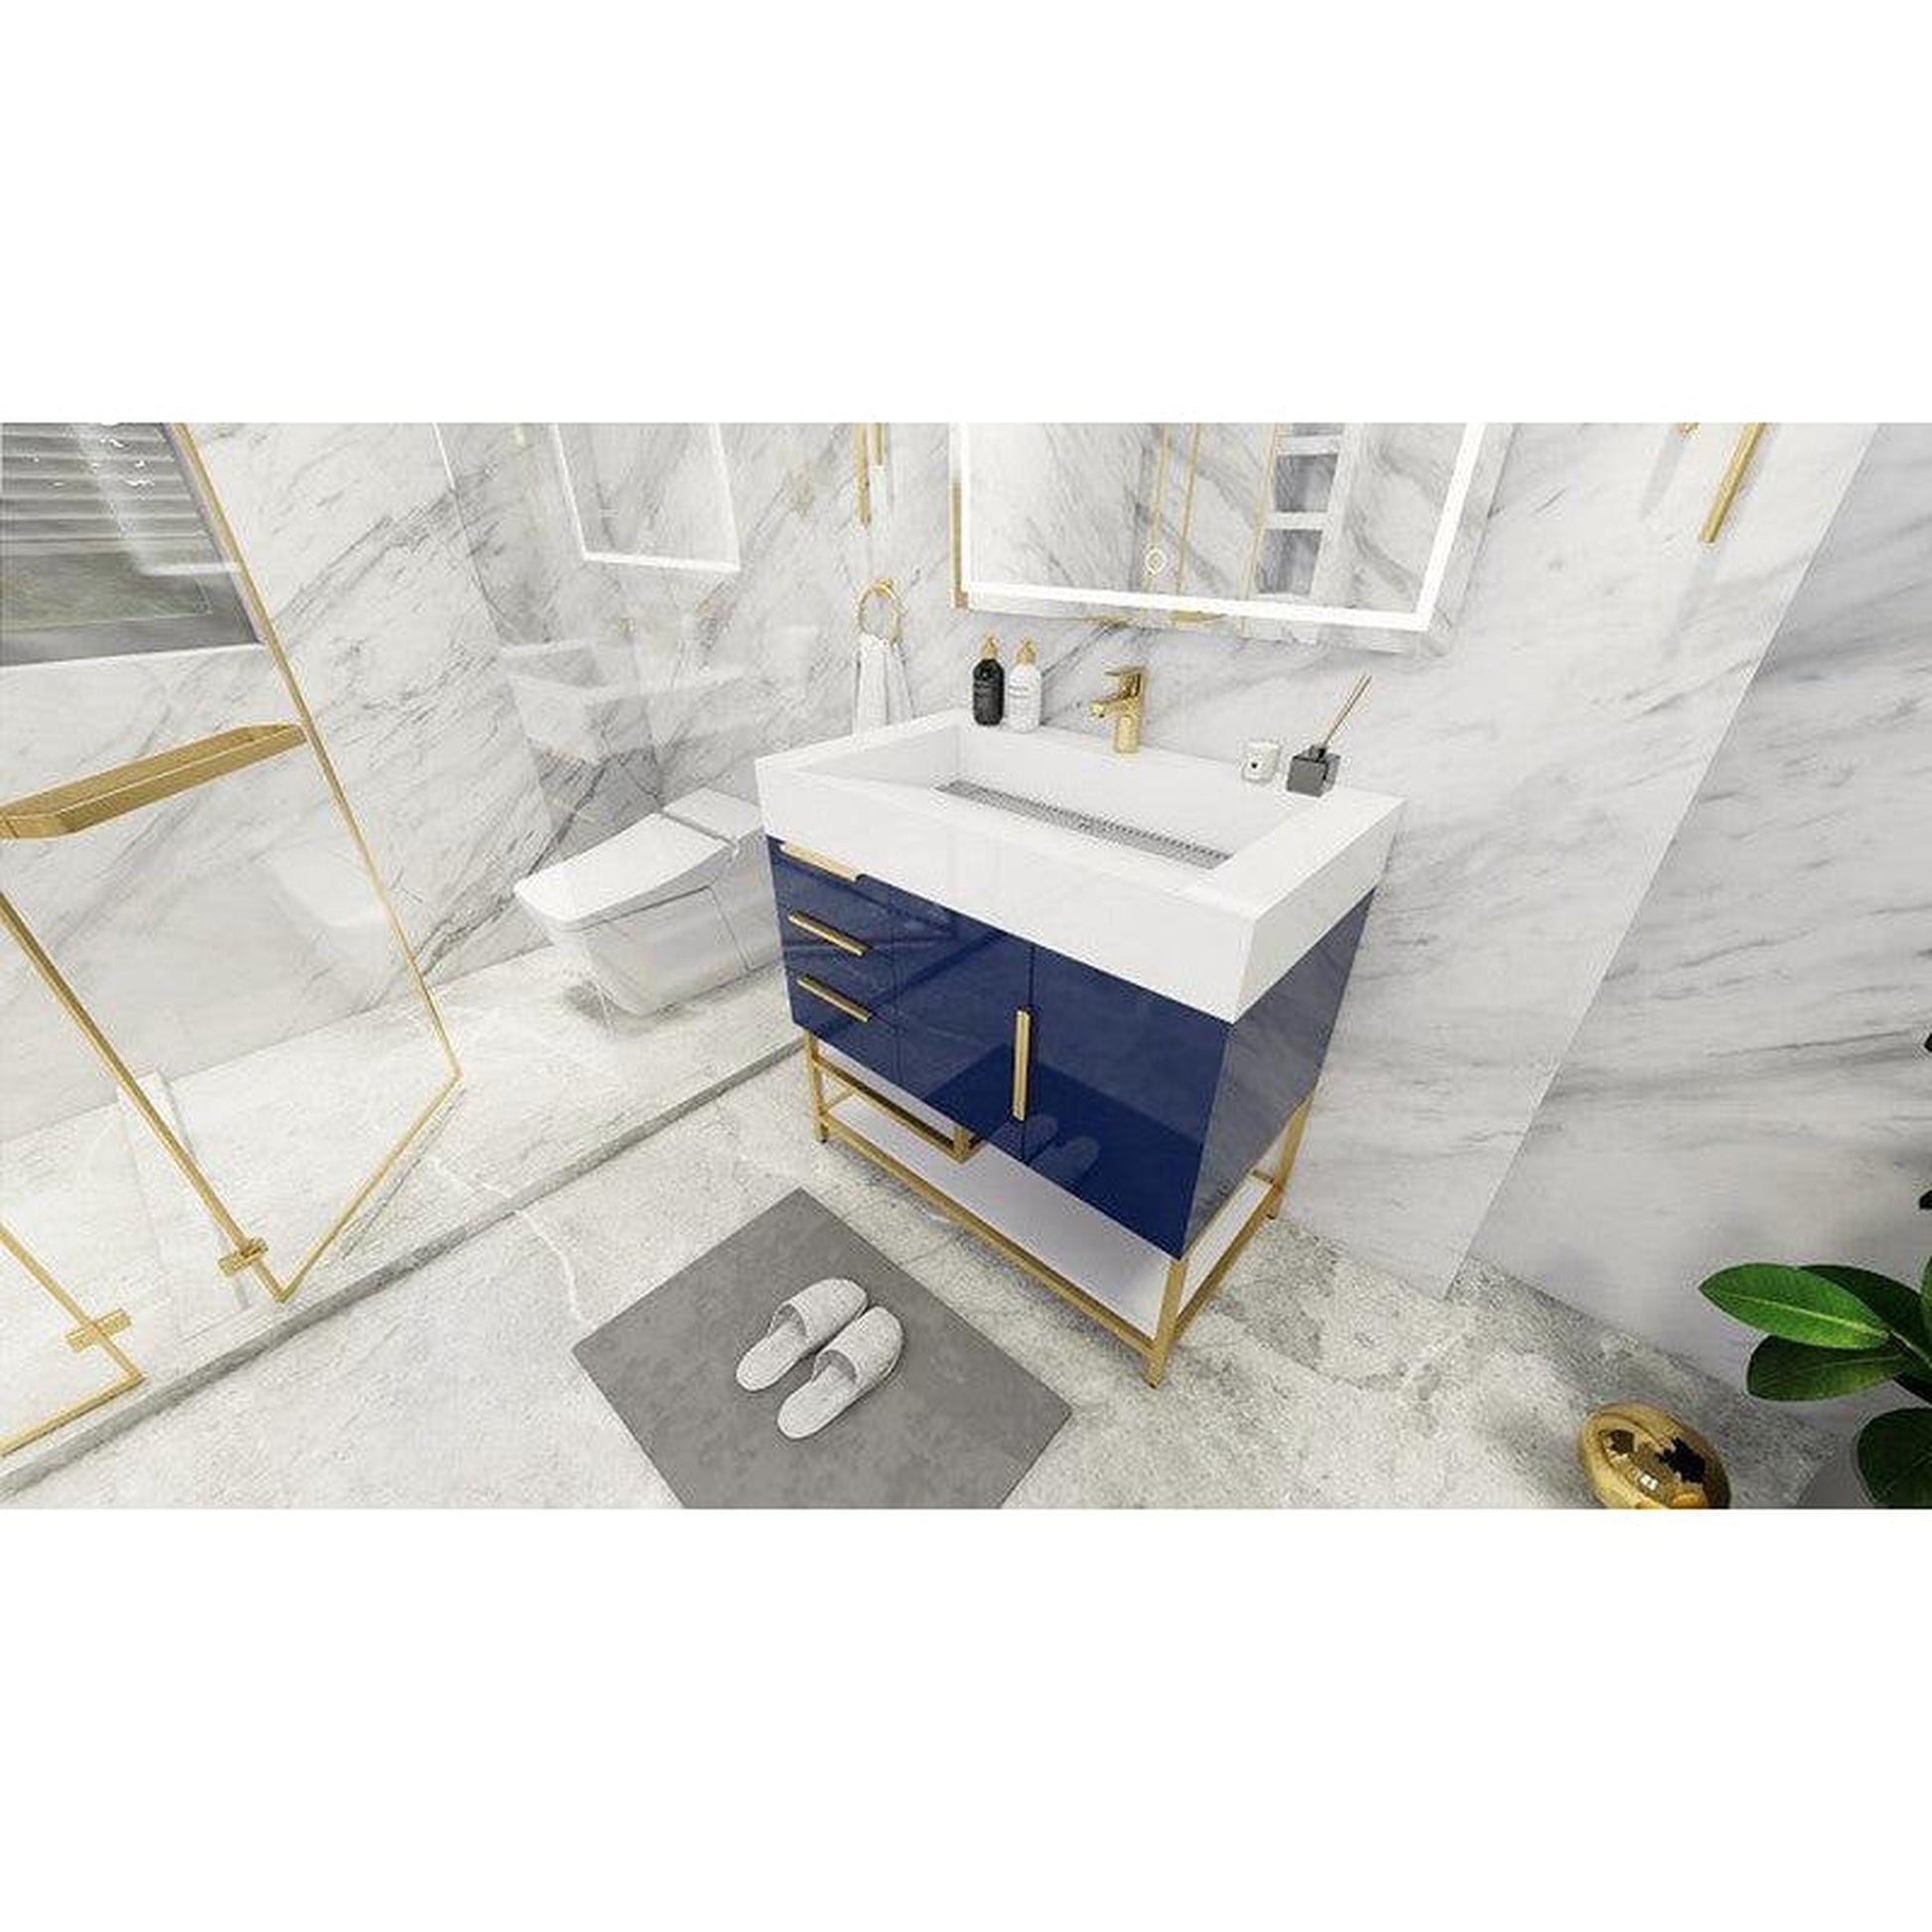 Moreno Bath Bethany 36" High Gloss Night Blue Freestanding Vanity With Left Side Drawers and Single Reinforced White Acrylic Sink